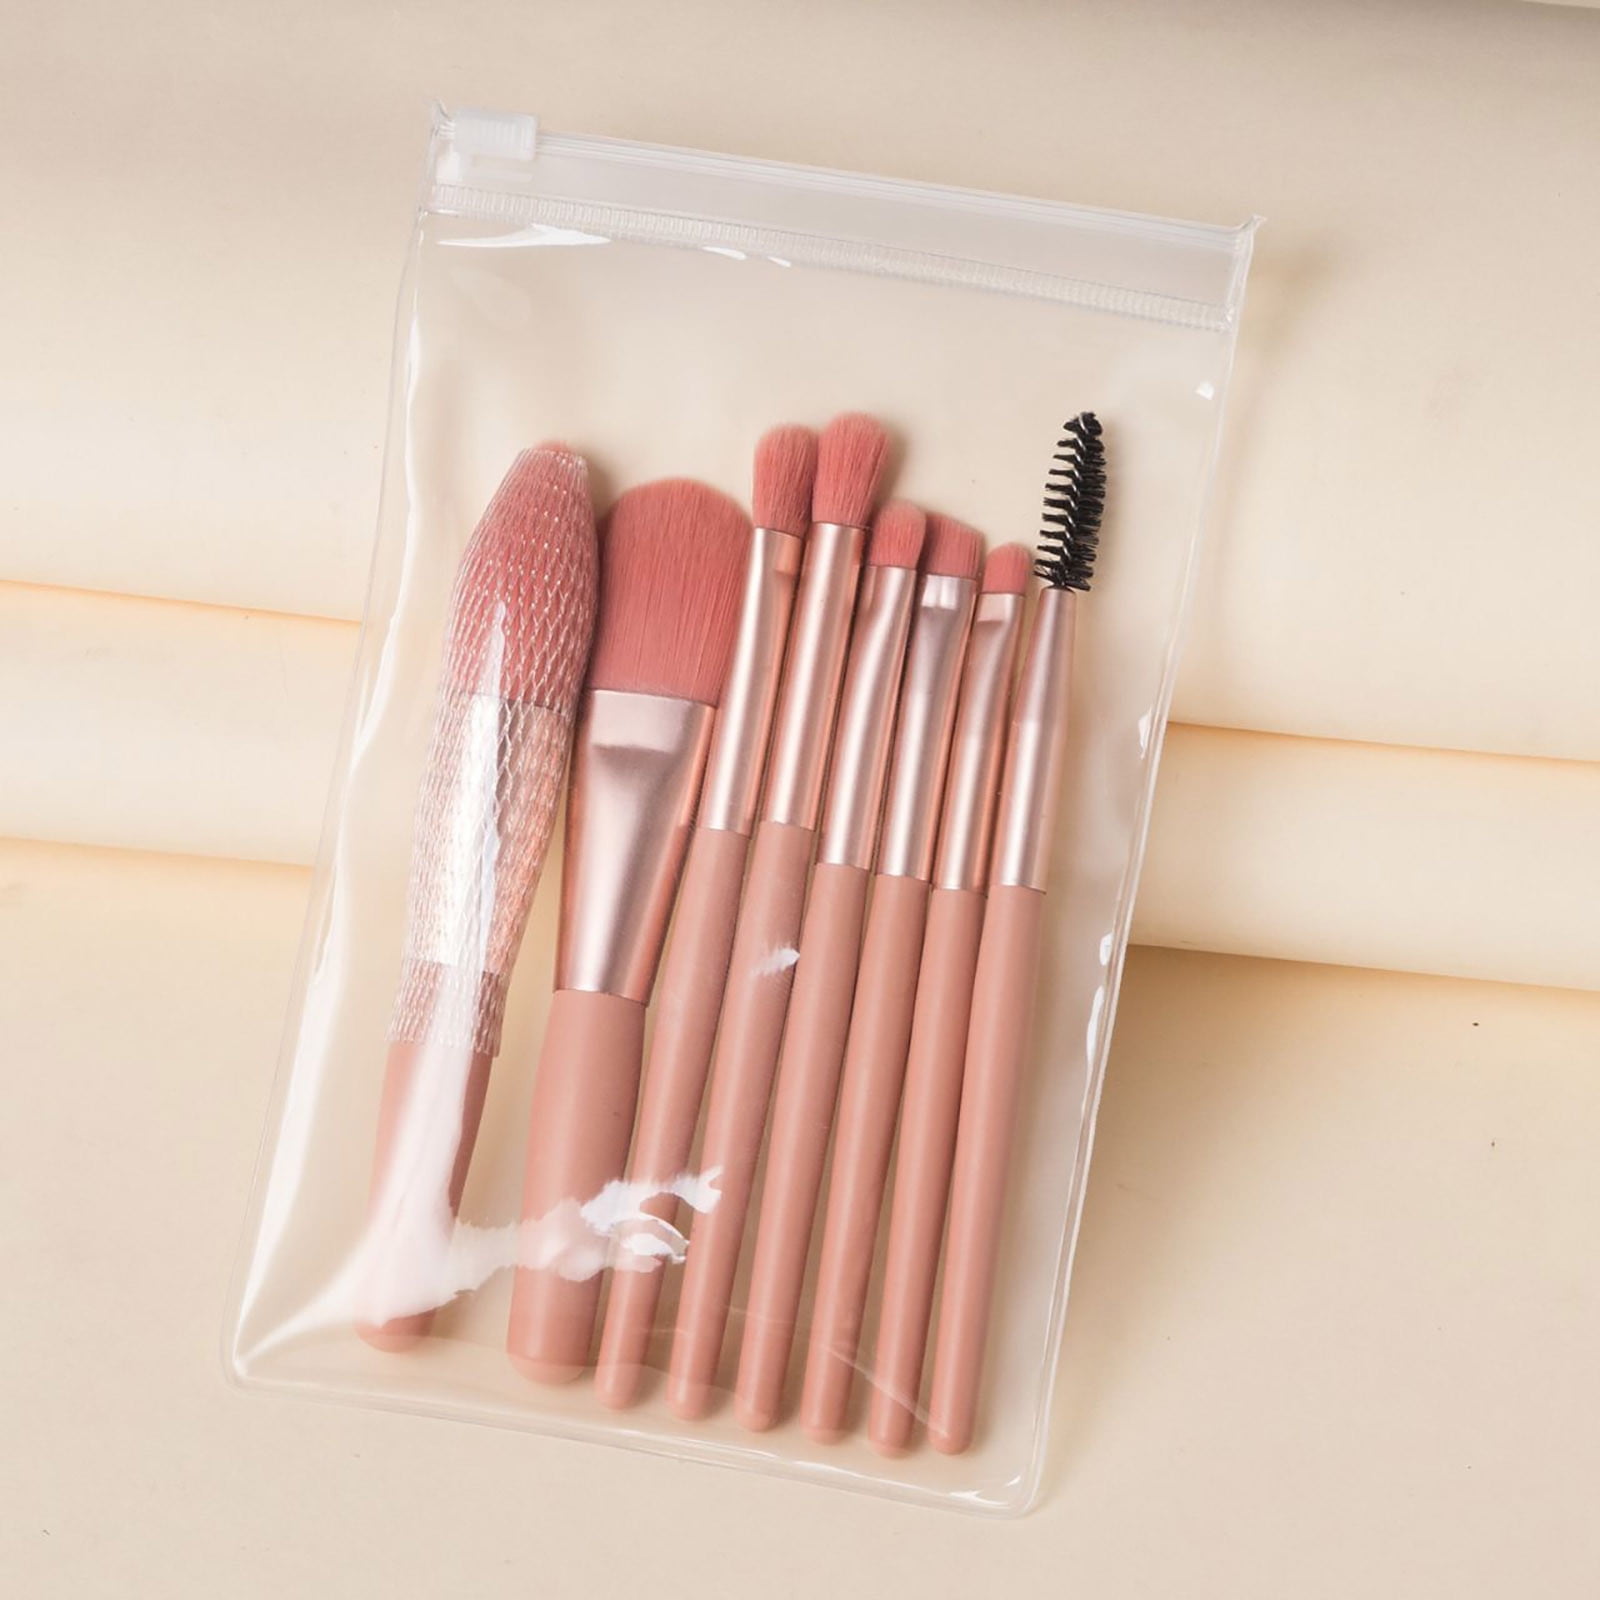 10X Makeup Brush Set Eye and Face Cosmetic Brushes w/ Brush Case Box Ideal  Gift